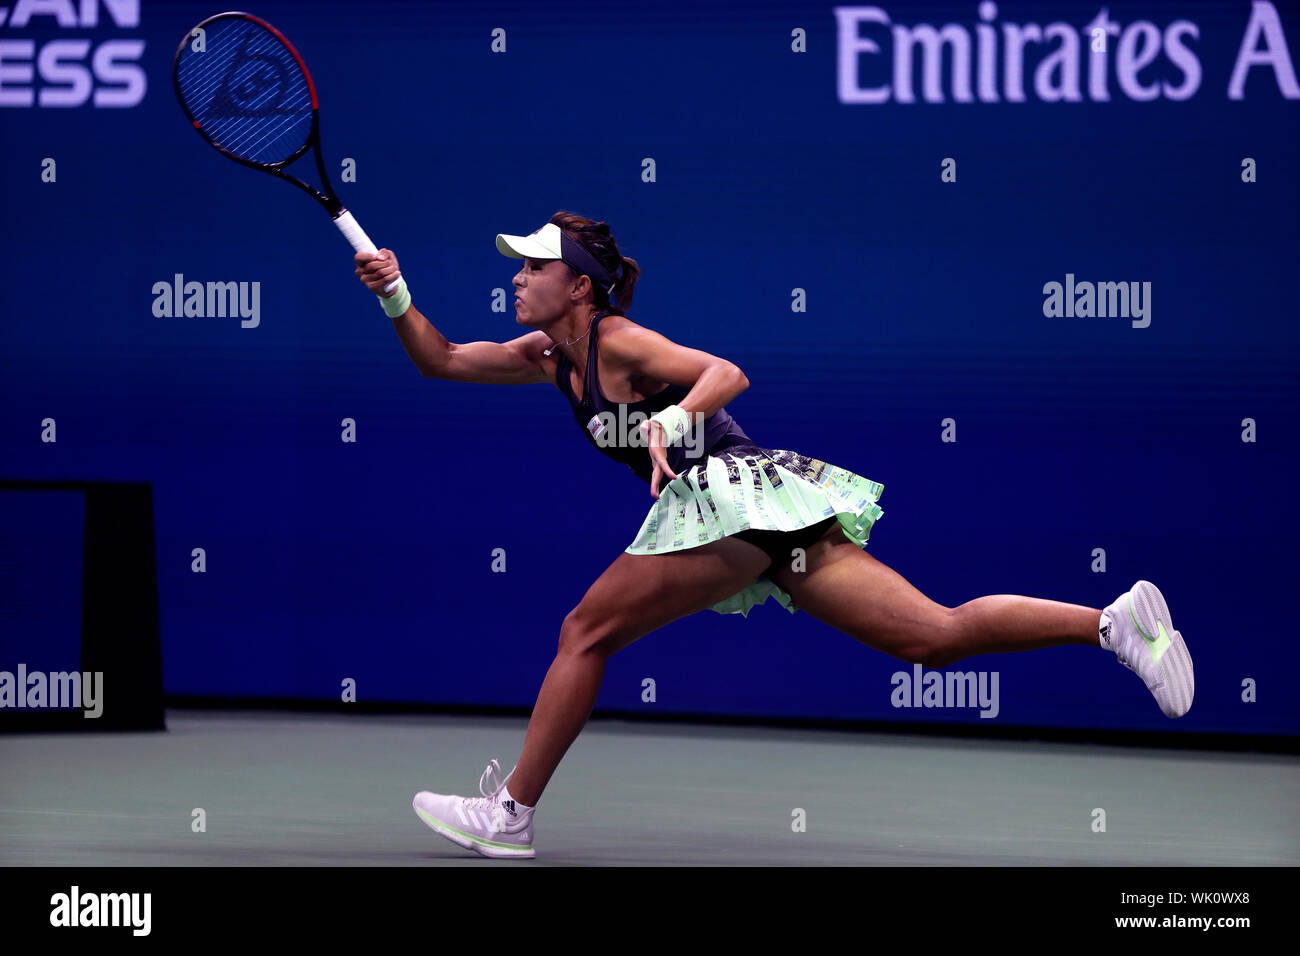 Flushing Meadows, New York, United States - 3 September 2019. Wang Qiang of China during her quarter final match against Serena Williams at the US Open in Flushing Meadows, New York.   Williams won the match to record her 100th US Open match victory. Credit: Adam Stoltman/Alamy Live News Stock Photo